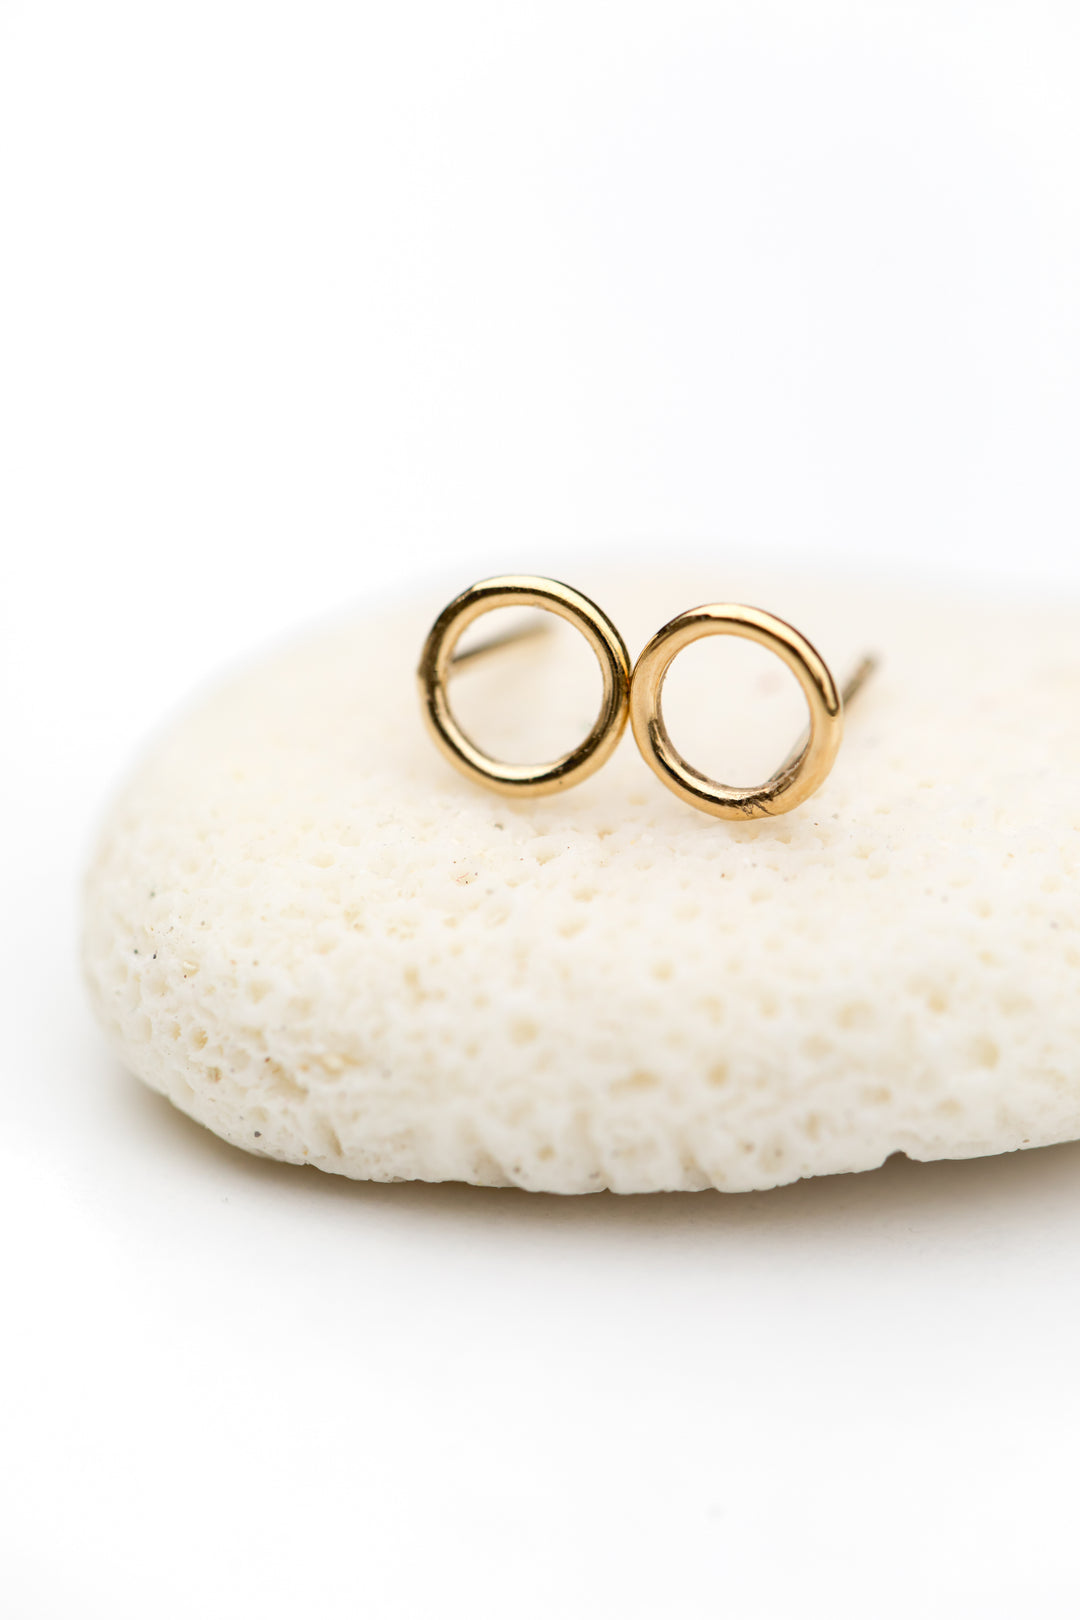 small circle gold filled earring studs by Anna Shae Jewelry in Lexington, Kentucky 